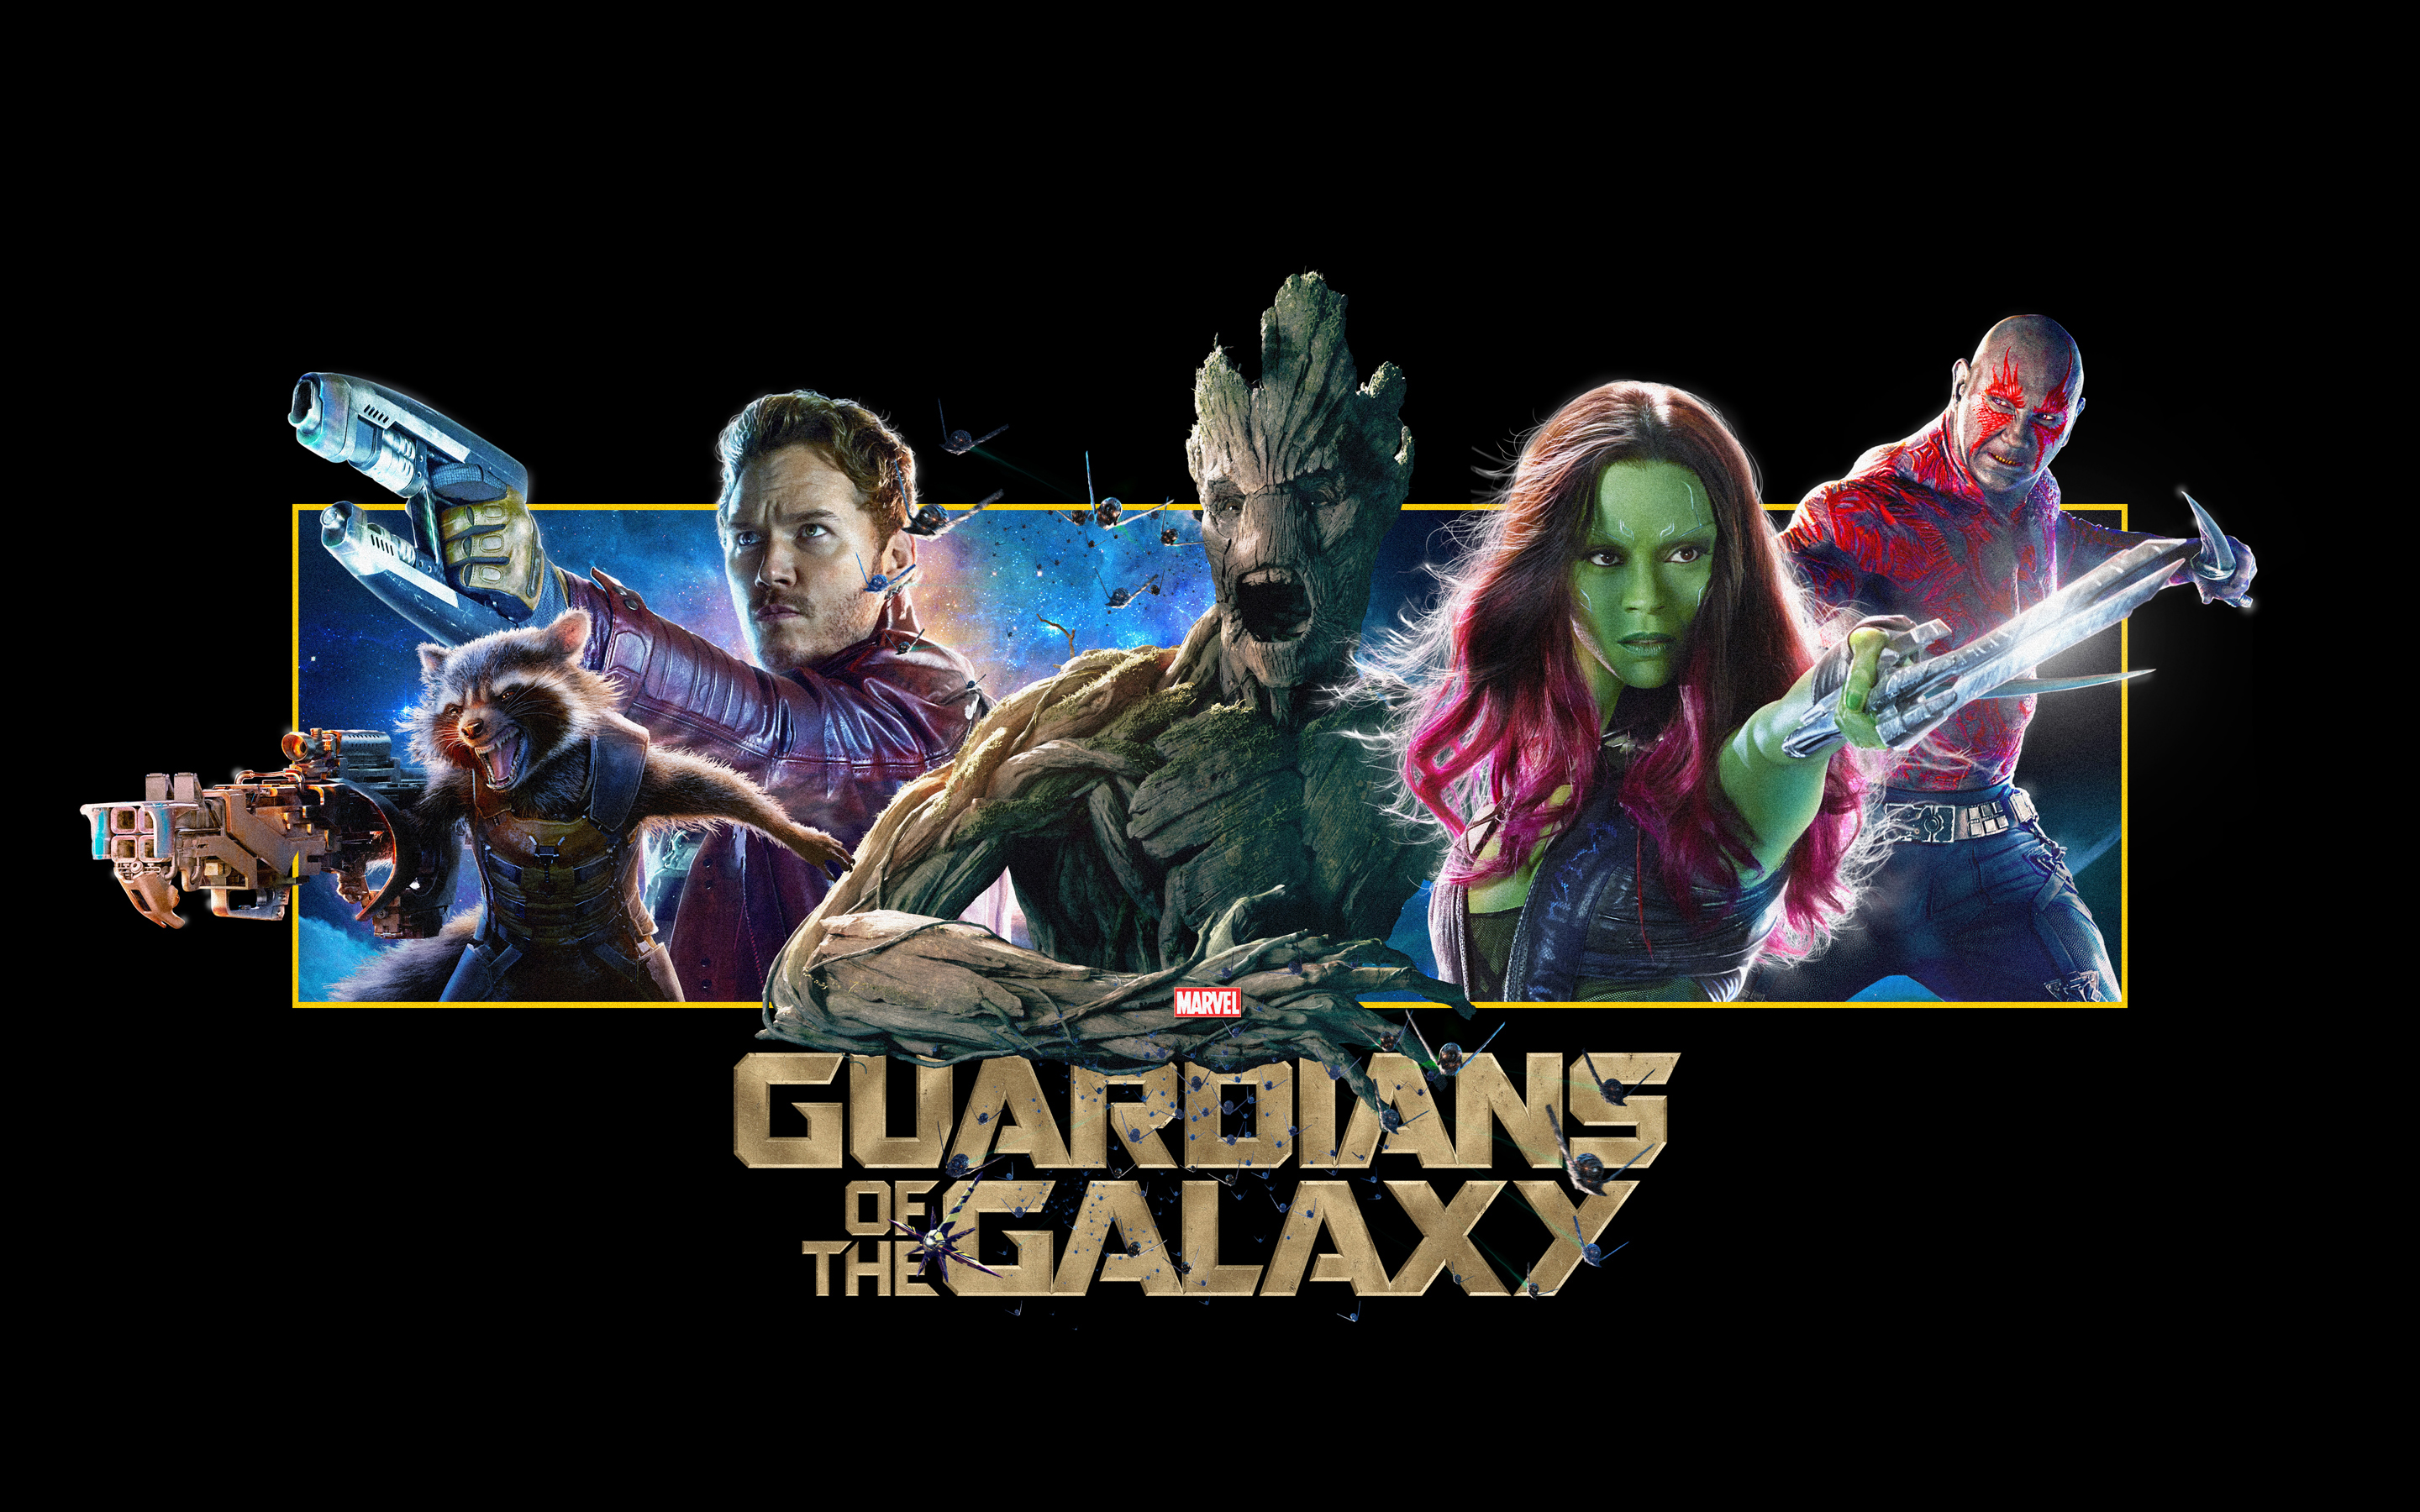 guardians of the galaxy wallpaper,games,fictional character,poster,graphic design,movie